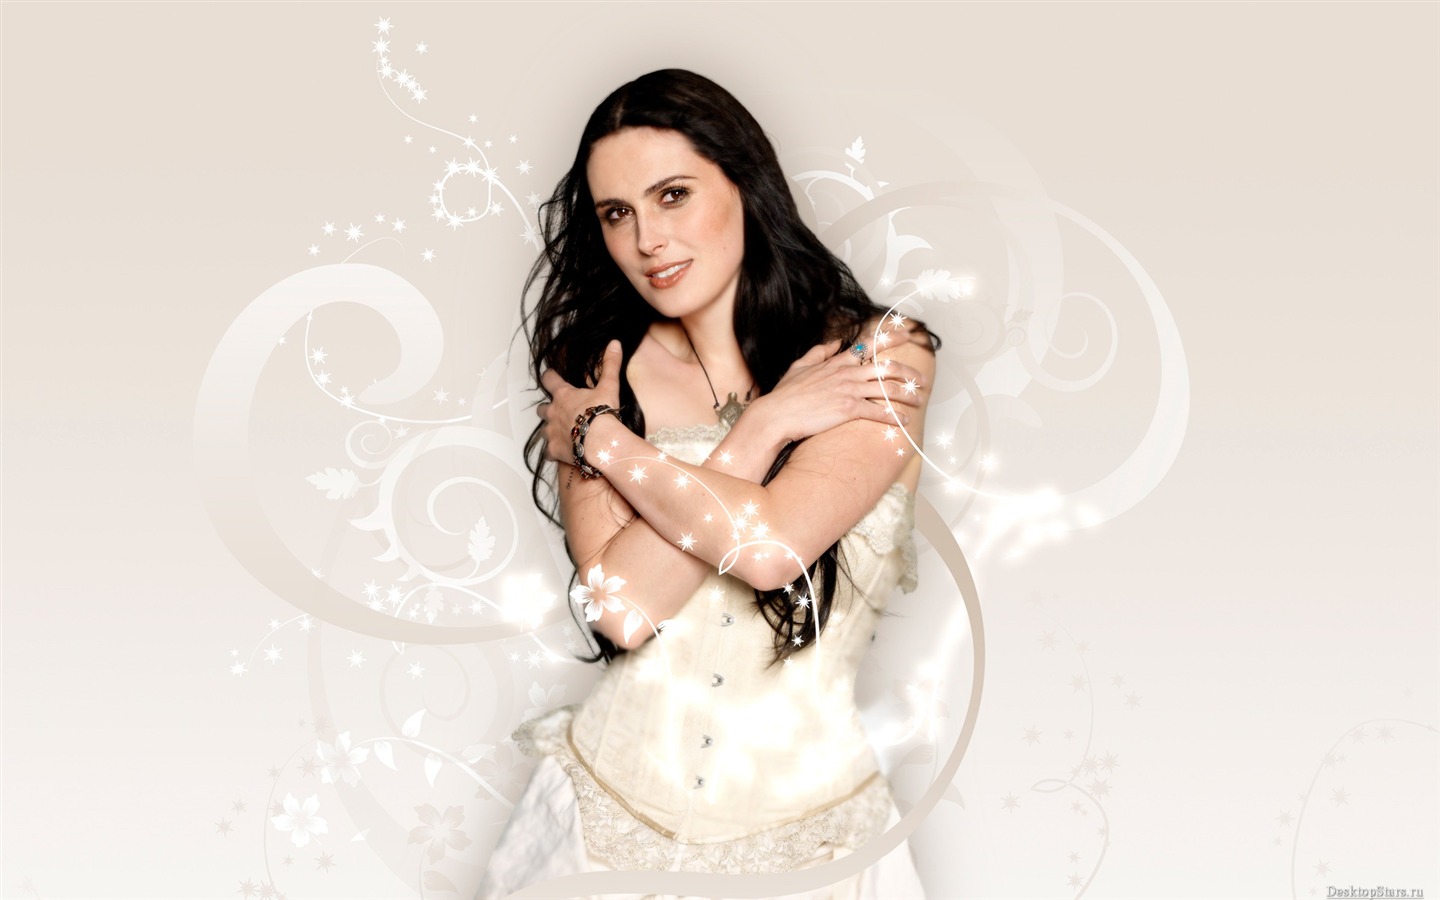 Sharon den Adel #002 - 1440x900 Wallpapers Pictures Photos Images